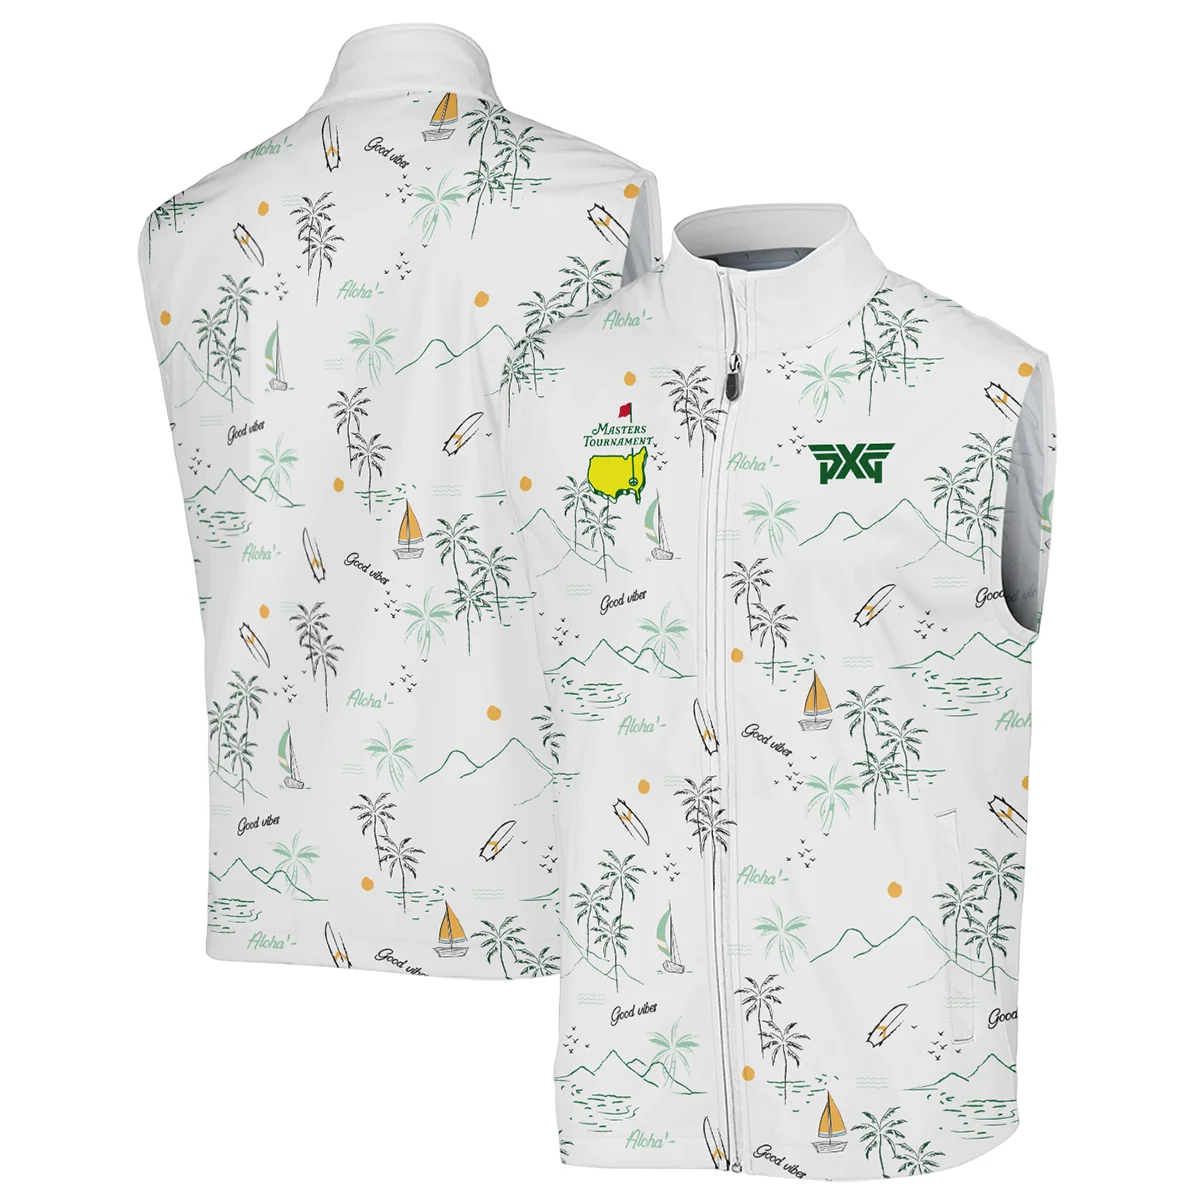 Island Seamless Pattern Golf Masters Tournament Polo Shirt Style Classic Polo Shirt For Men